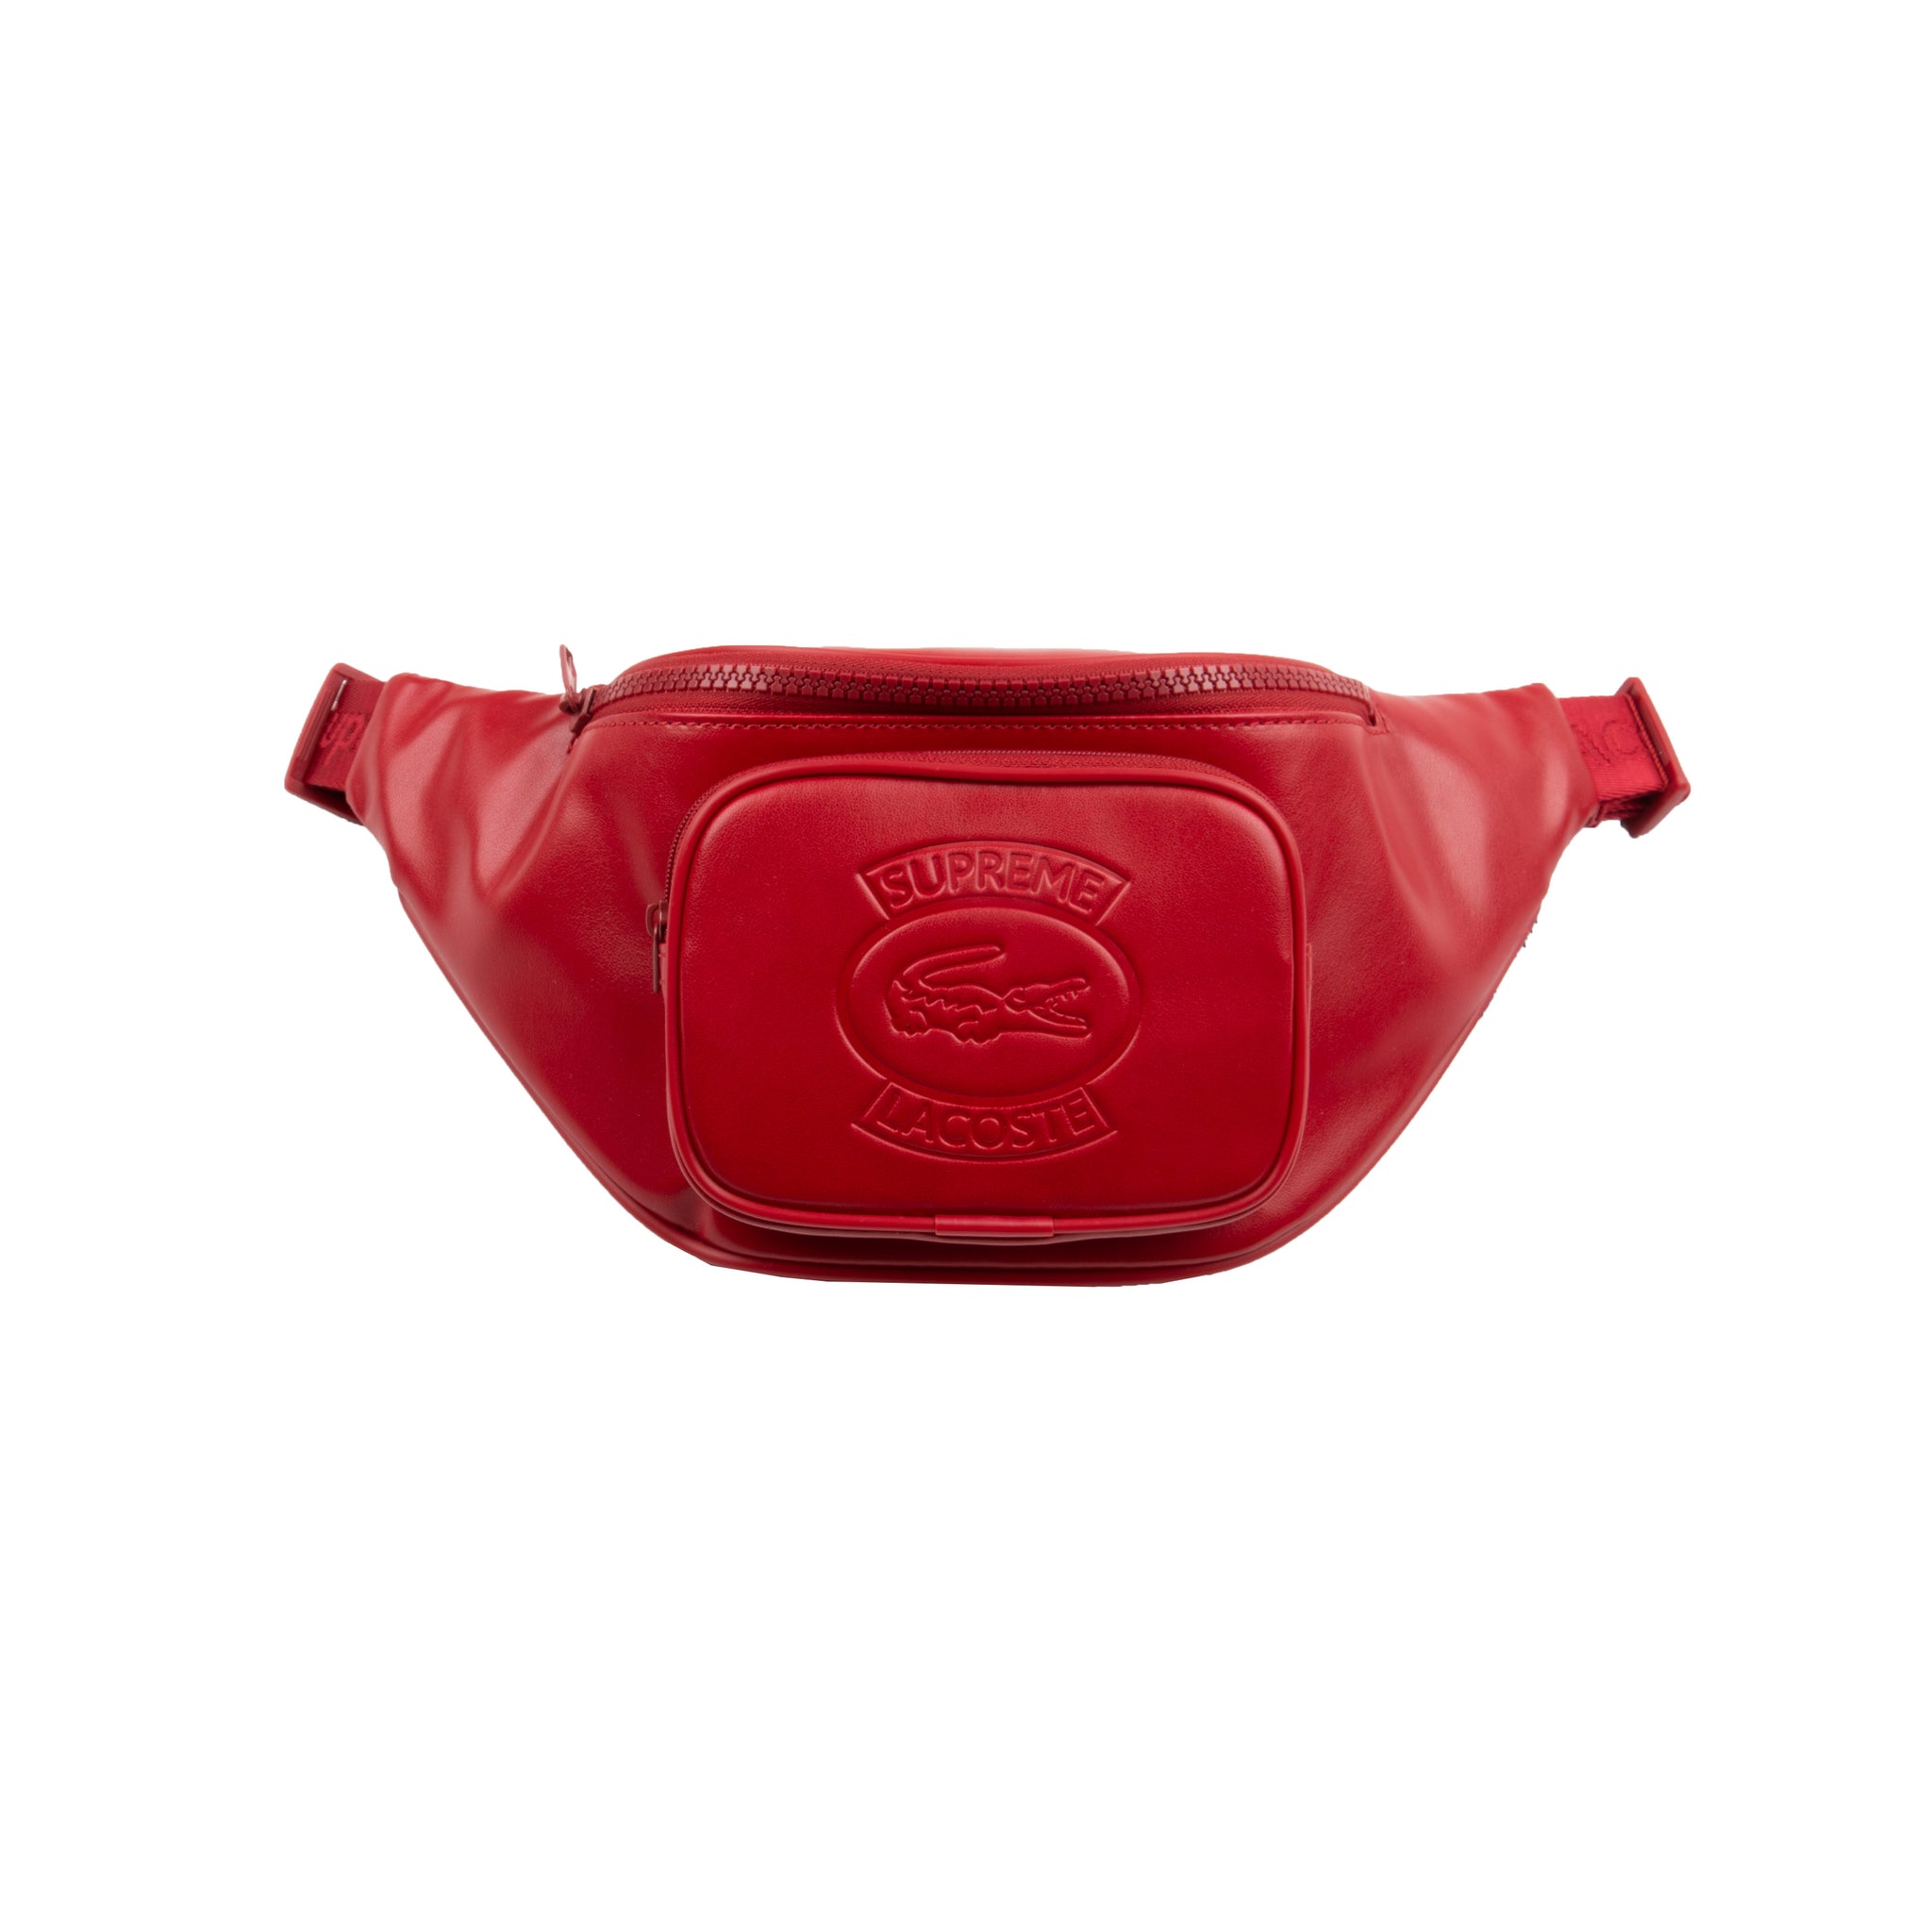 Supreme Red Lacoste Waist Bag